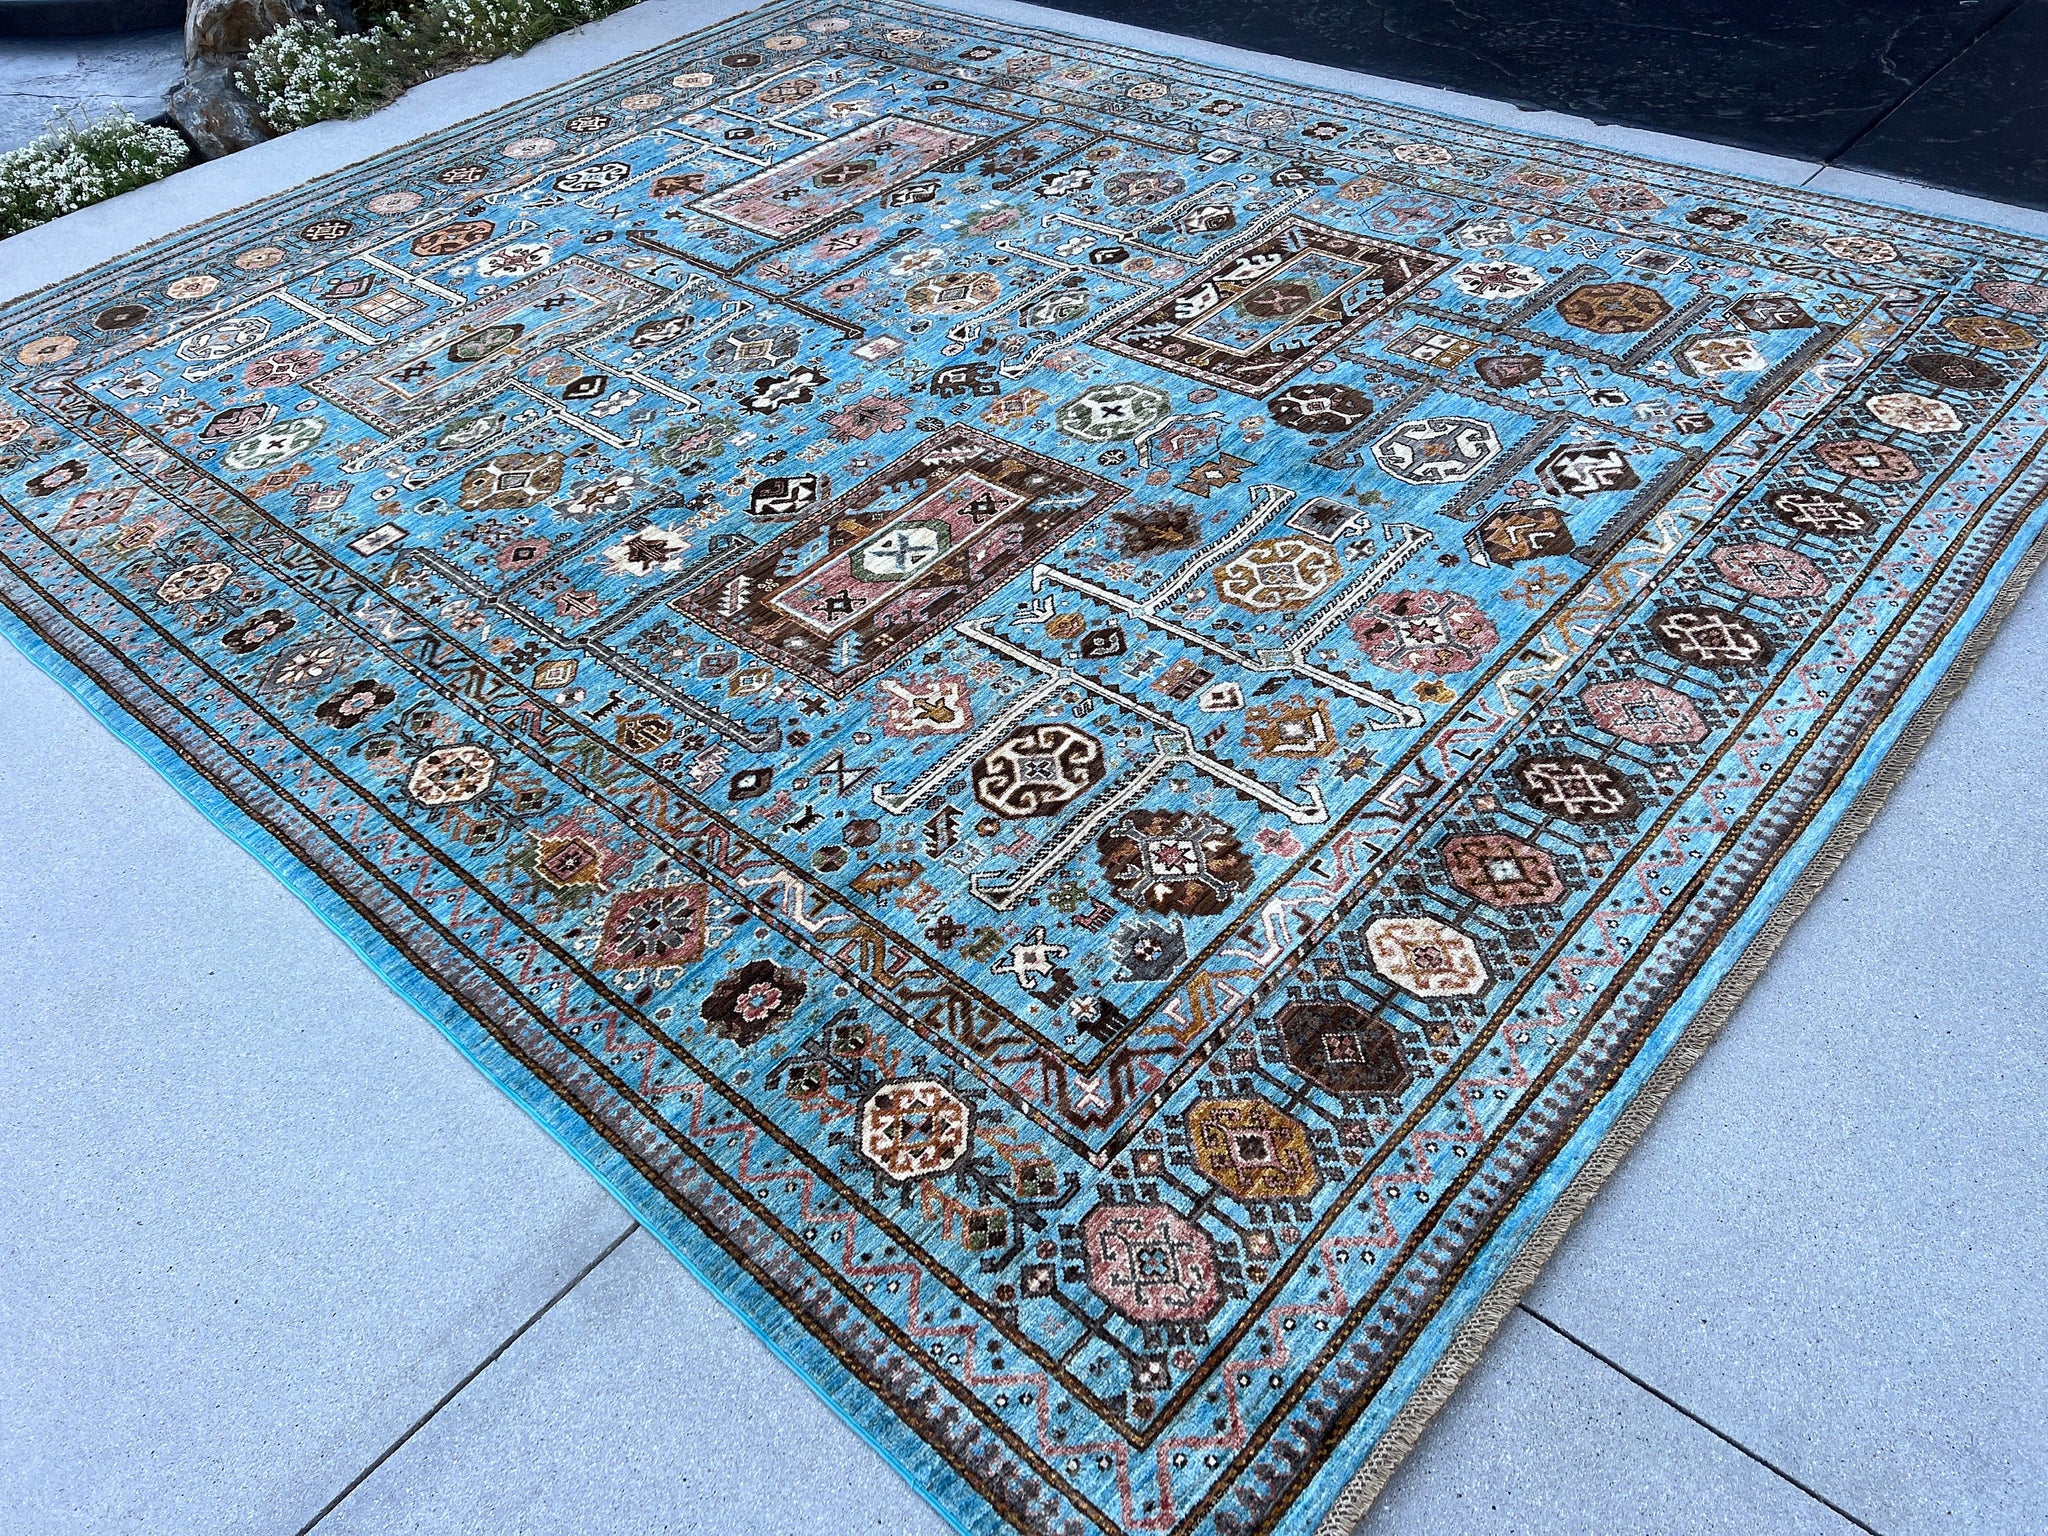 9x11 (275x335) Handmade Afghan Rug | Denim Blue Charcoal Grey Brown Salmon Pink Caramel Gold Forest Green Ivory | Knotted Wool Turkish Heriz